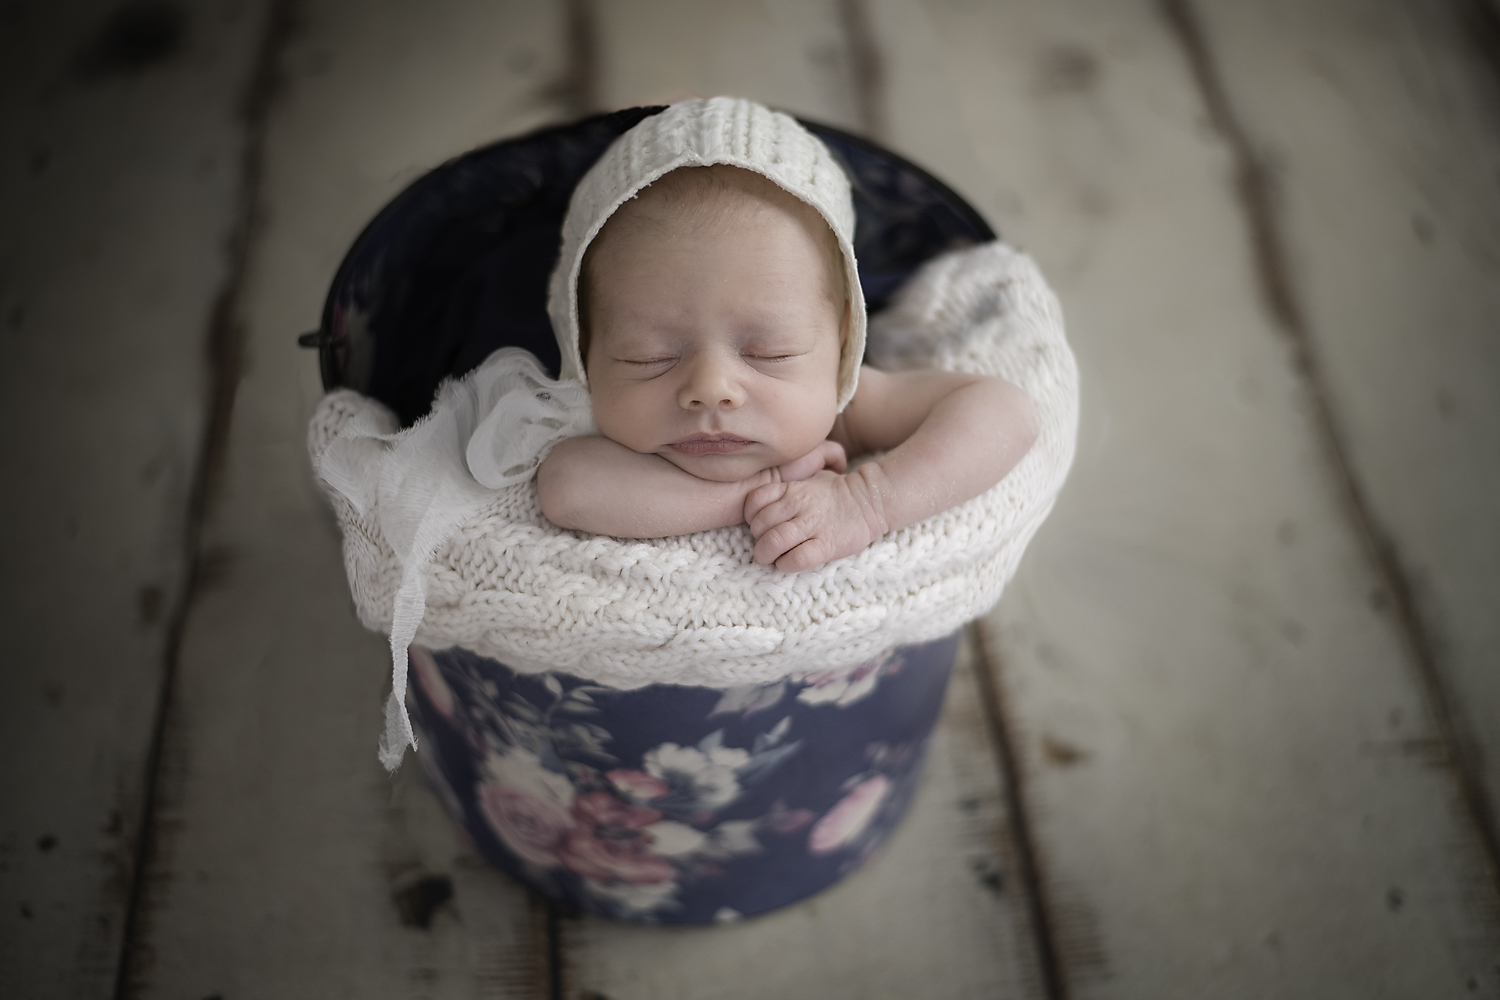 Newborn photography by Lisa Rowland at Perfect-Photos in Studio